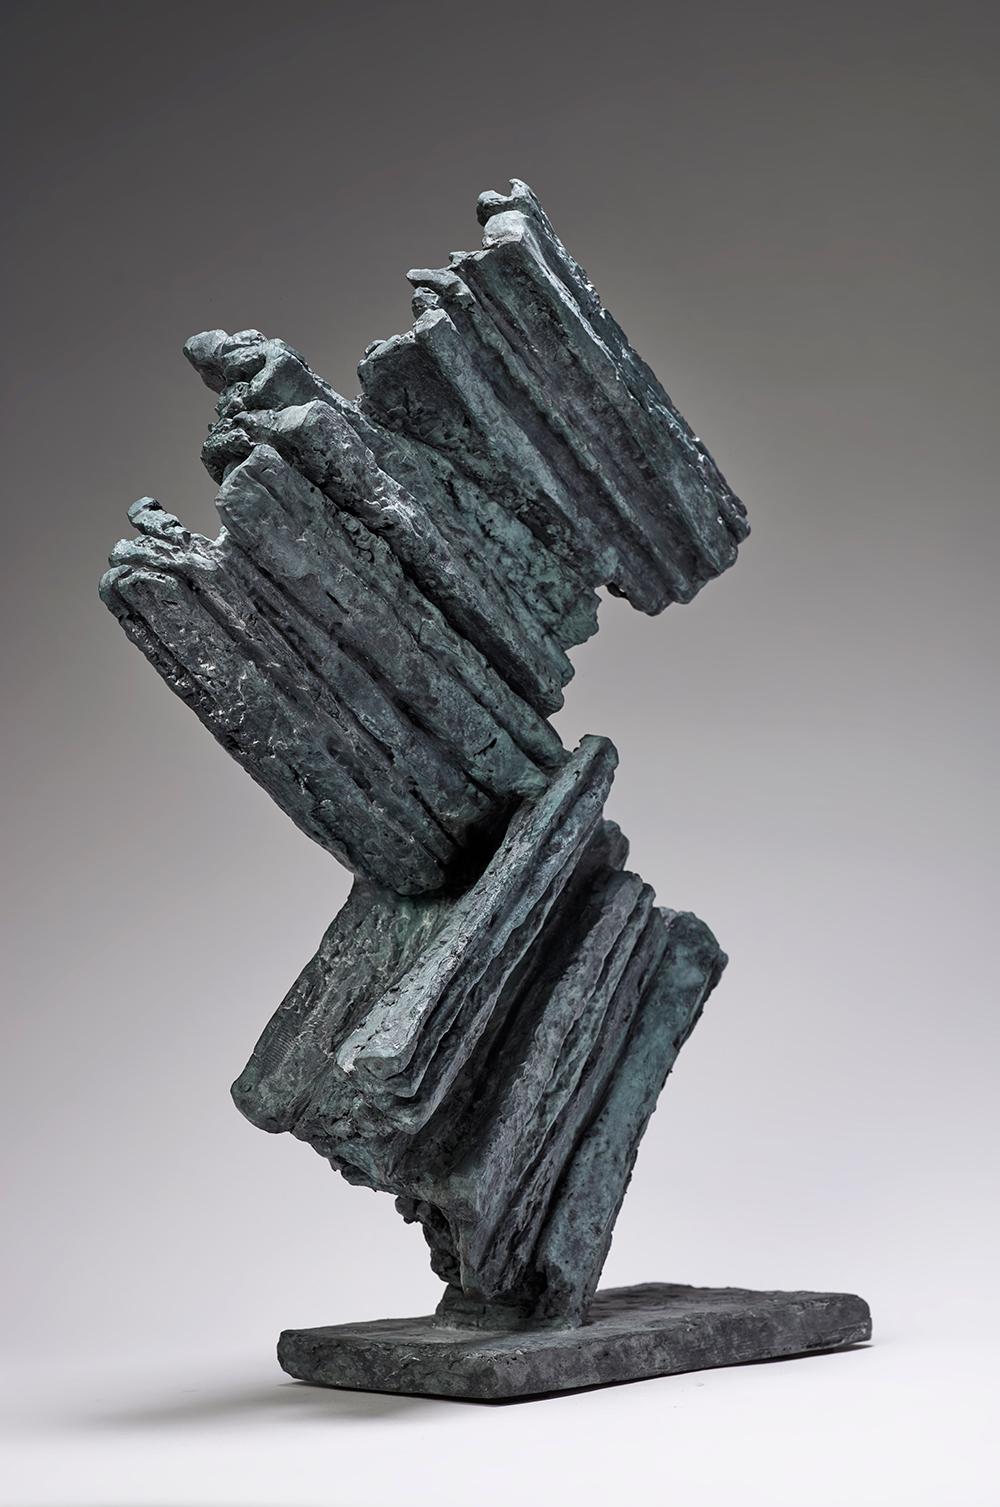 Harmony No. 3 is a bronze sculpture by contemporary artist Martine Demal, dimensions including base are 38 × 28 × 9.5 cm (15 × 11 × 3.7 in). The sculpture is signed and numbered, it is part of a limited edition of 8 editions + 4 artist’s proofs, and